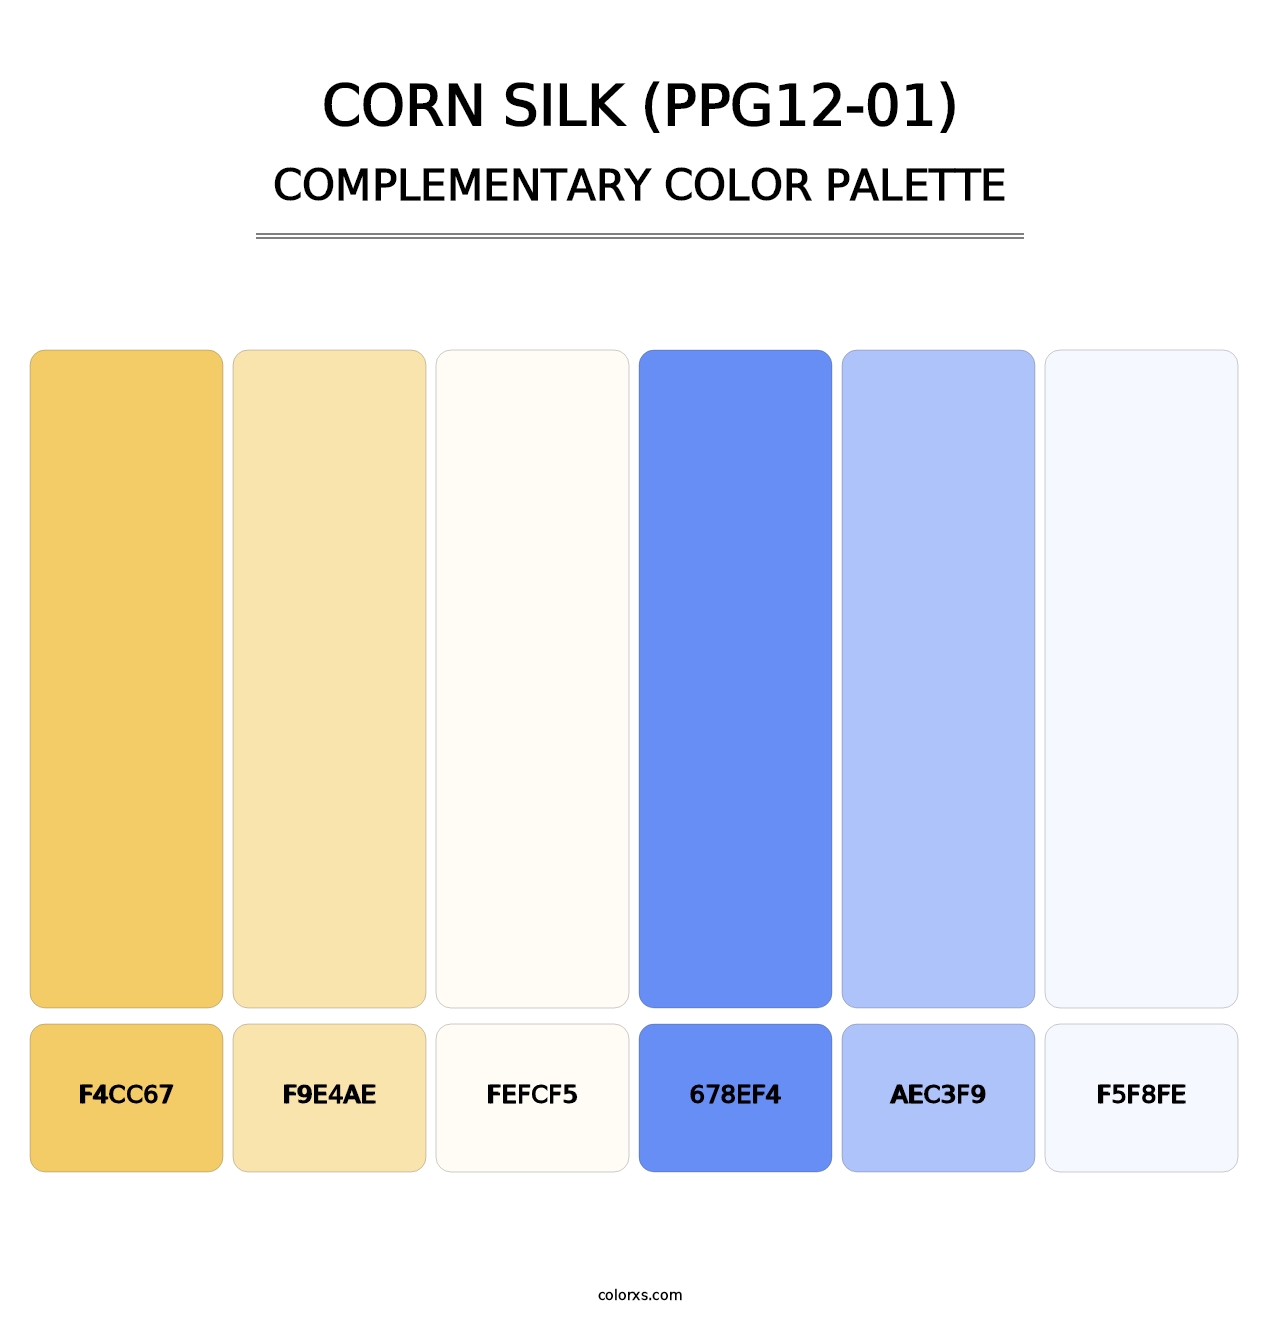 Corn Silk (PPG12-01) - Complementary Color Palette